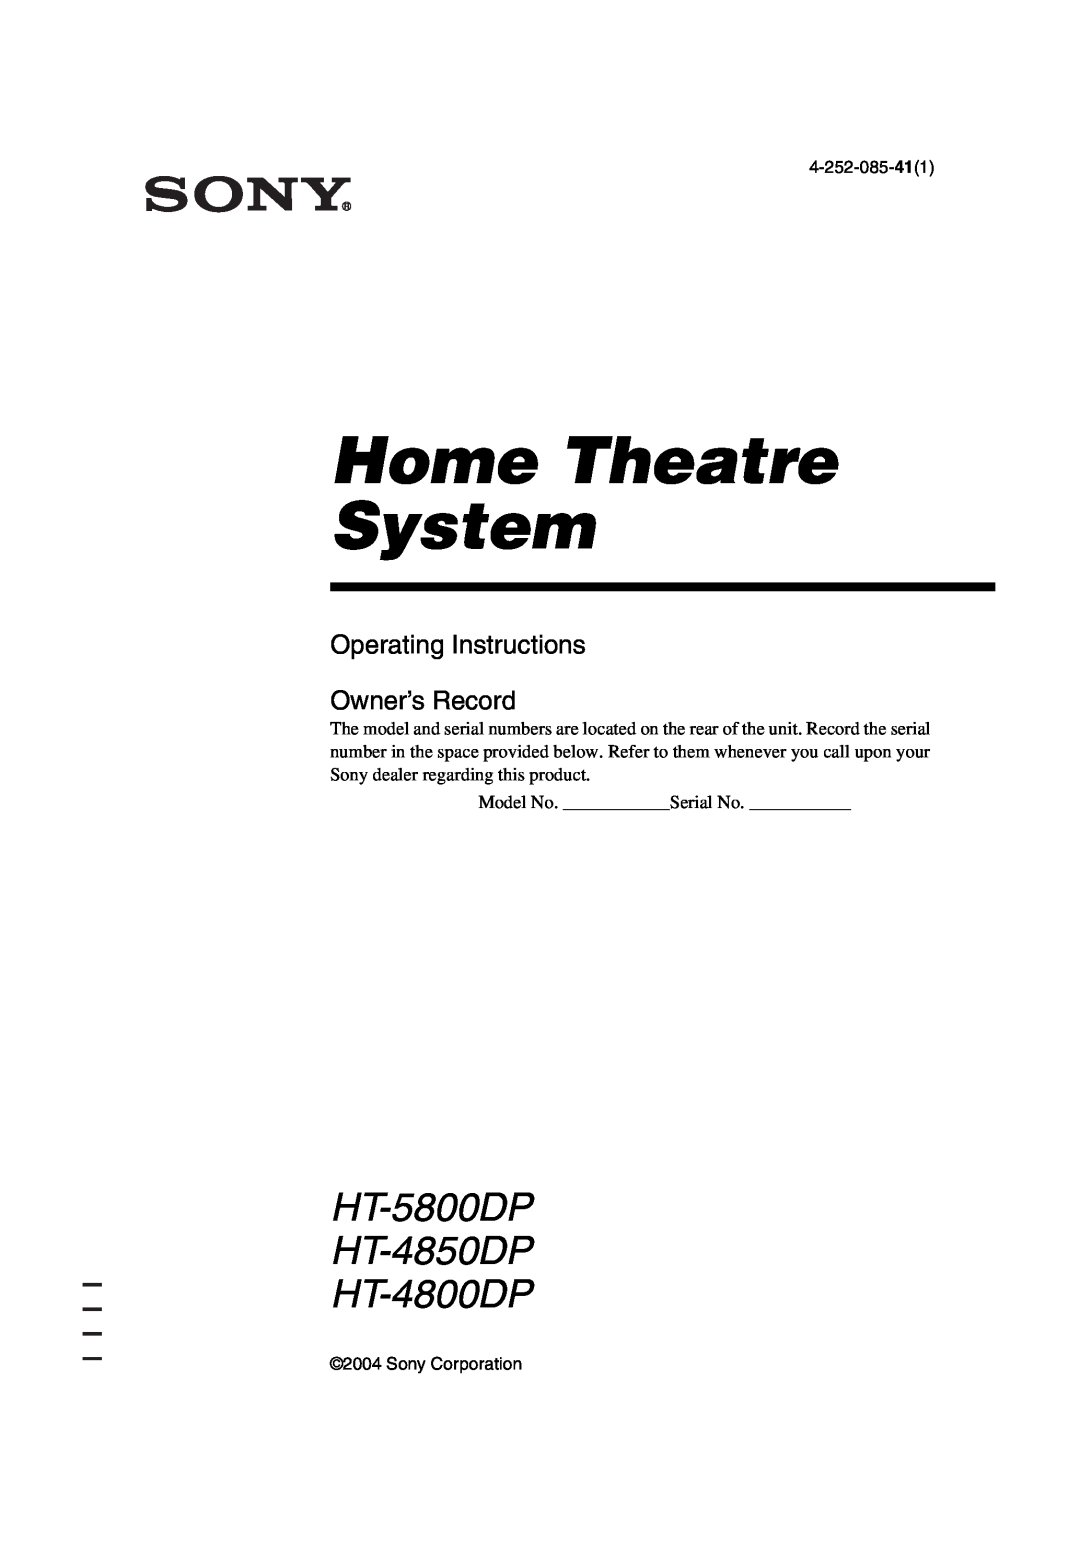 Sony manual Home Theatre System, HT-5800DP HT-4850DP HT-4800DP, Operating Instructions Owner’s Record 